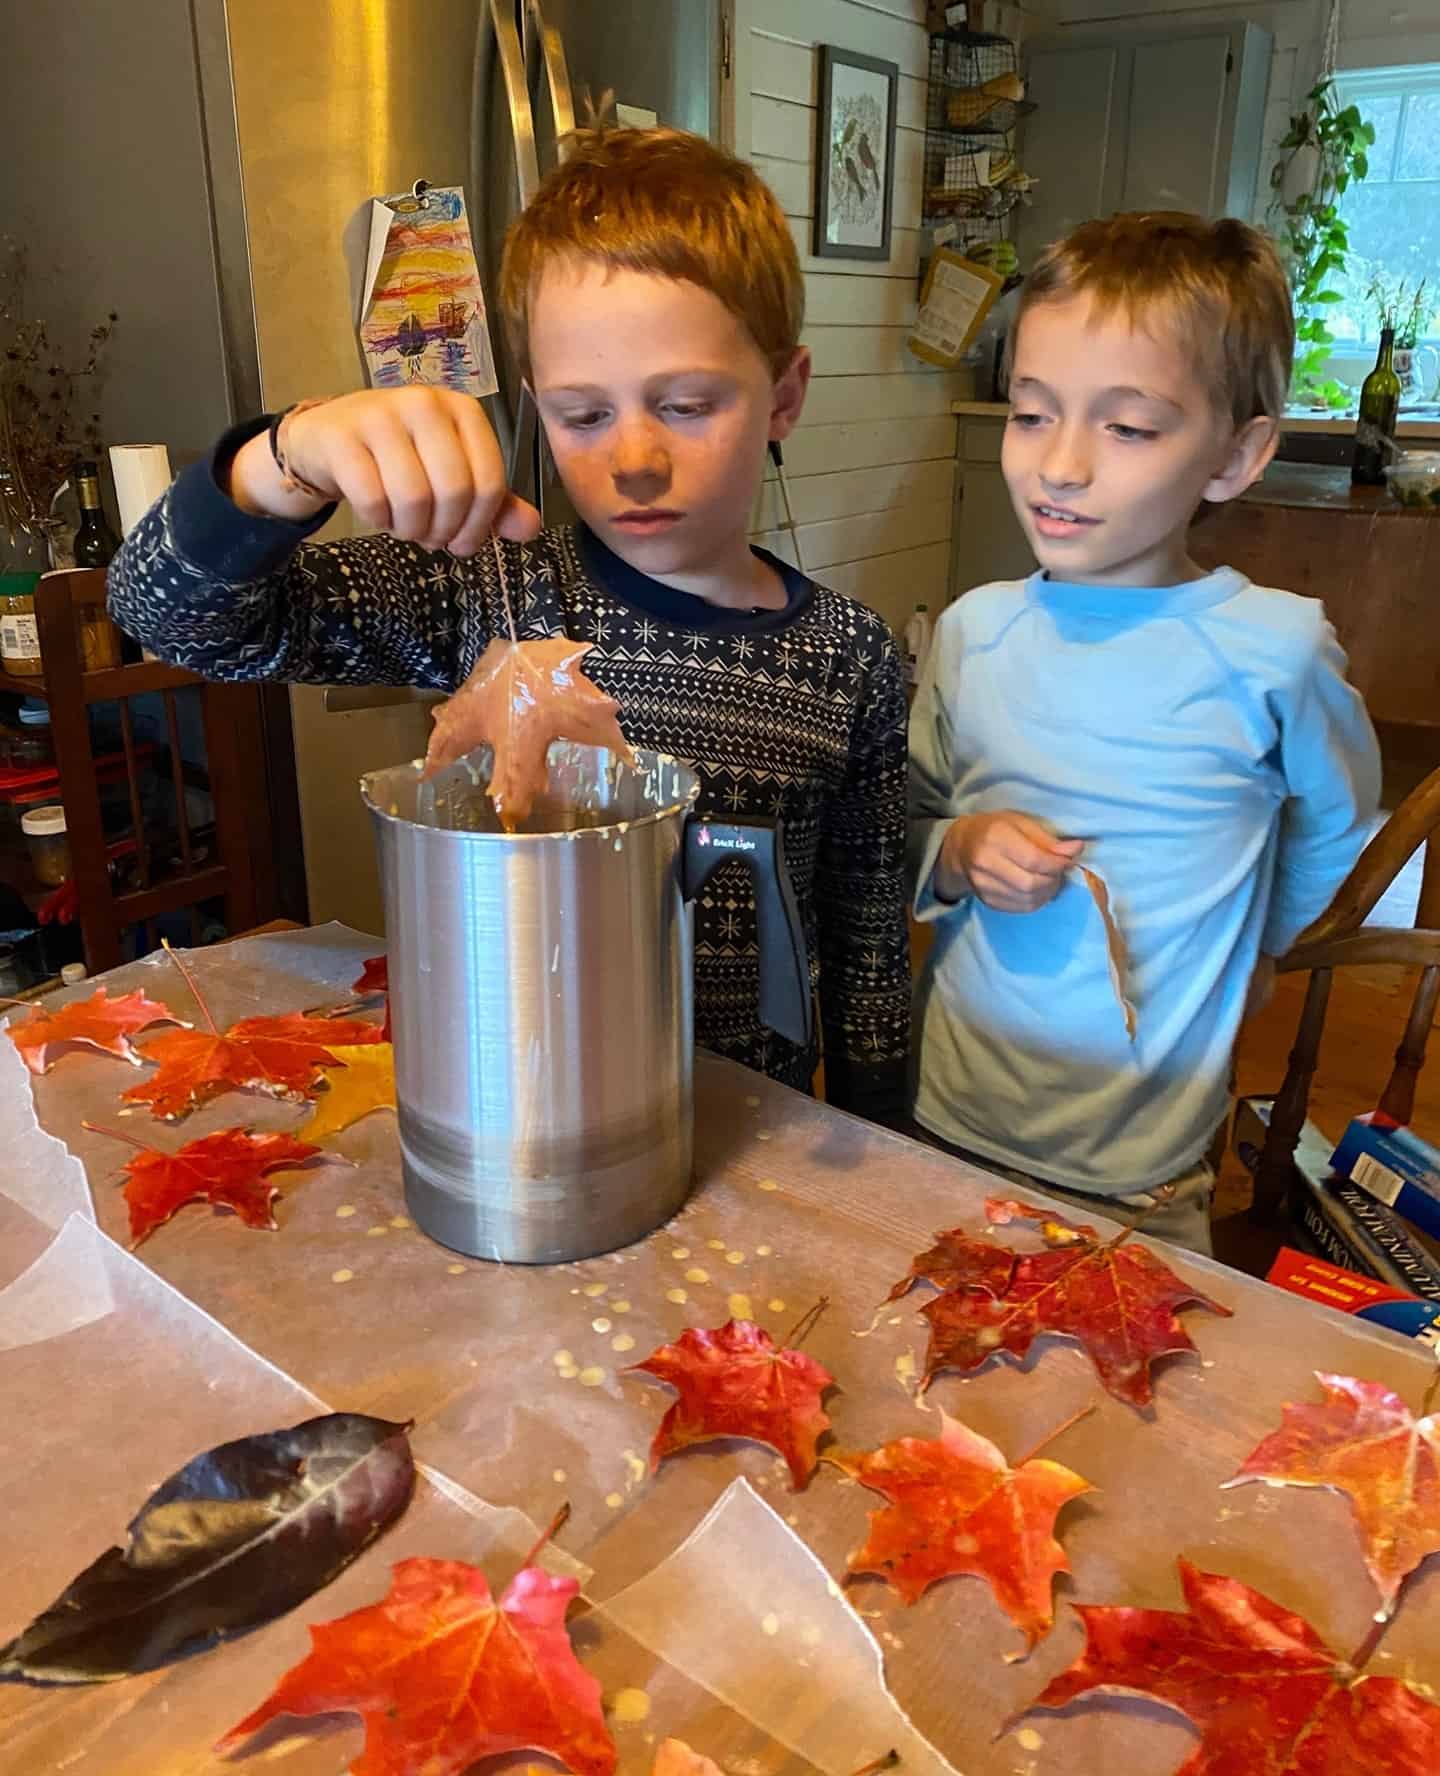 FAll leaf fun for kids - leaf crafts - leaf dipping beeswax